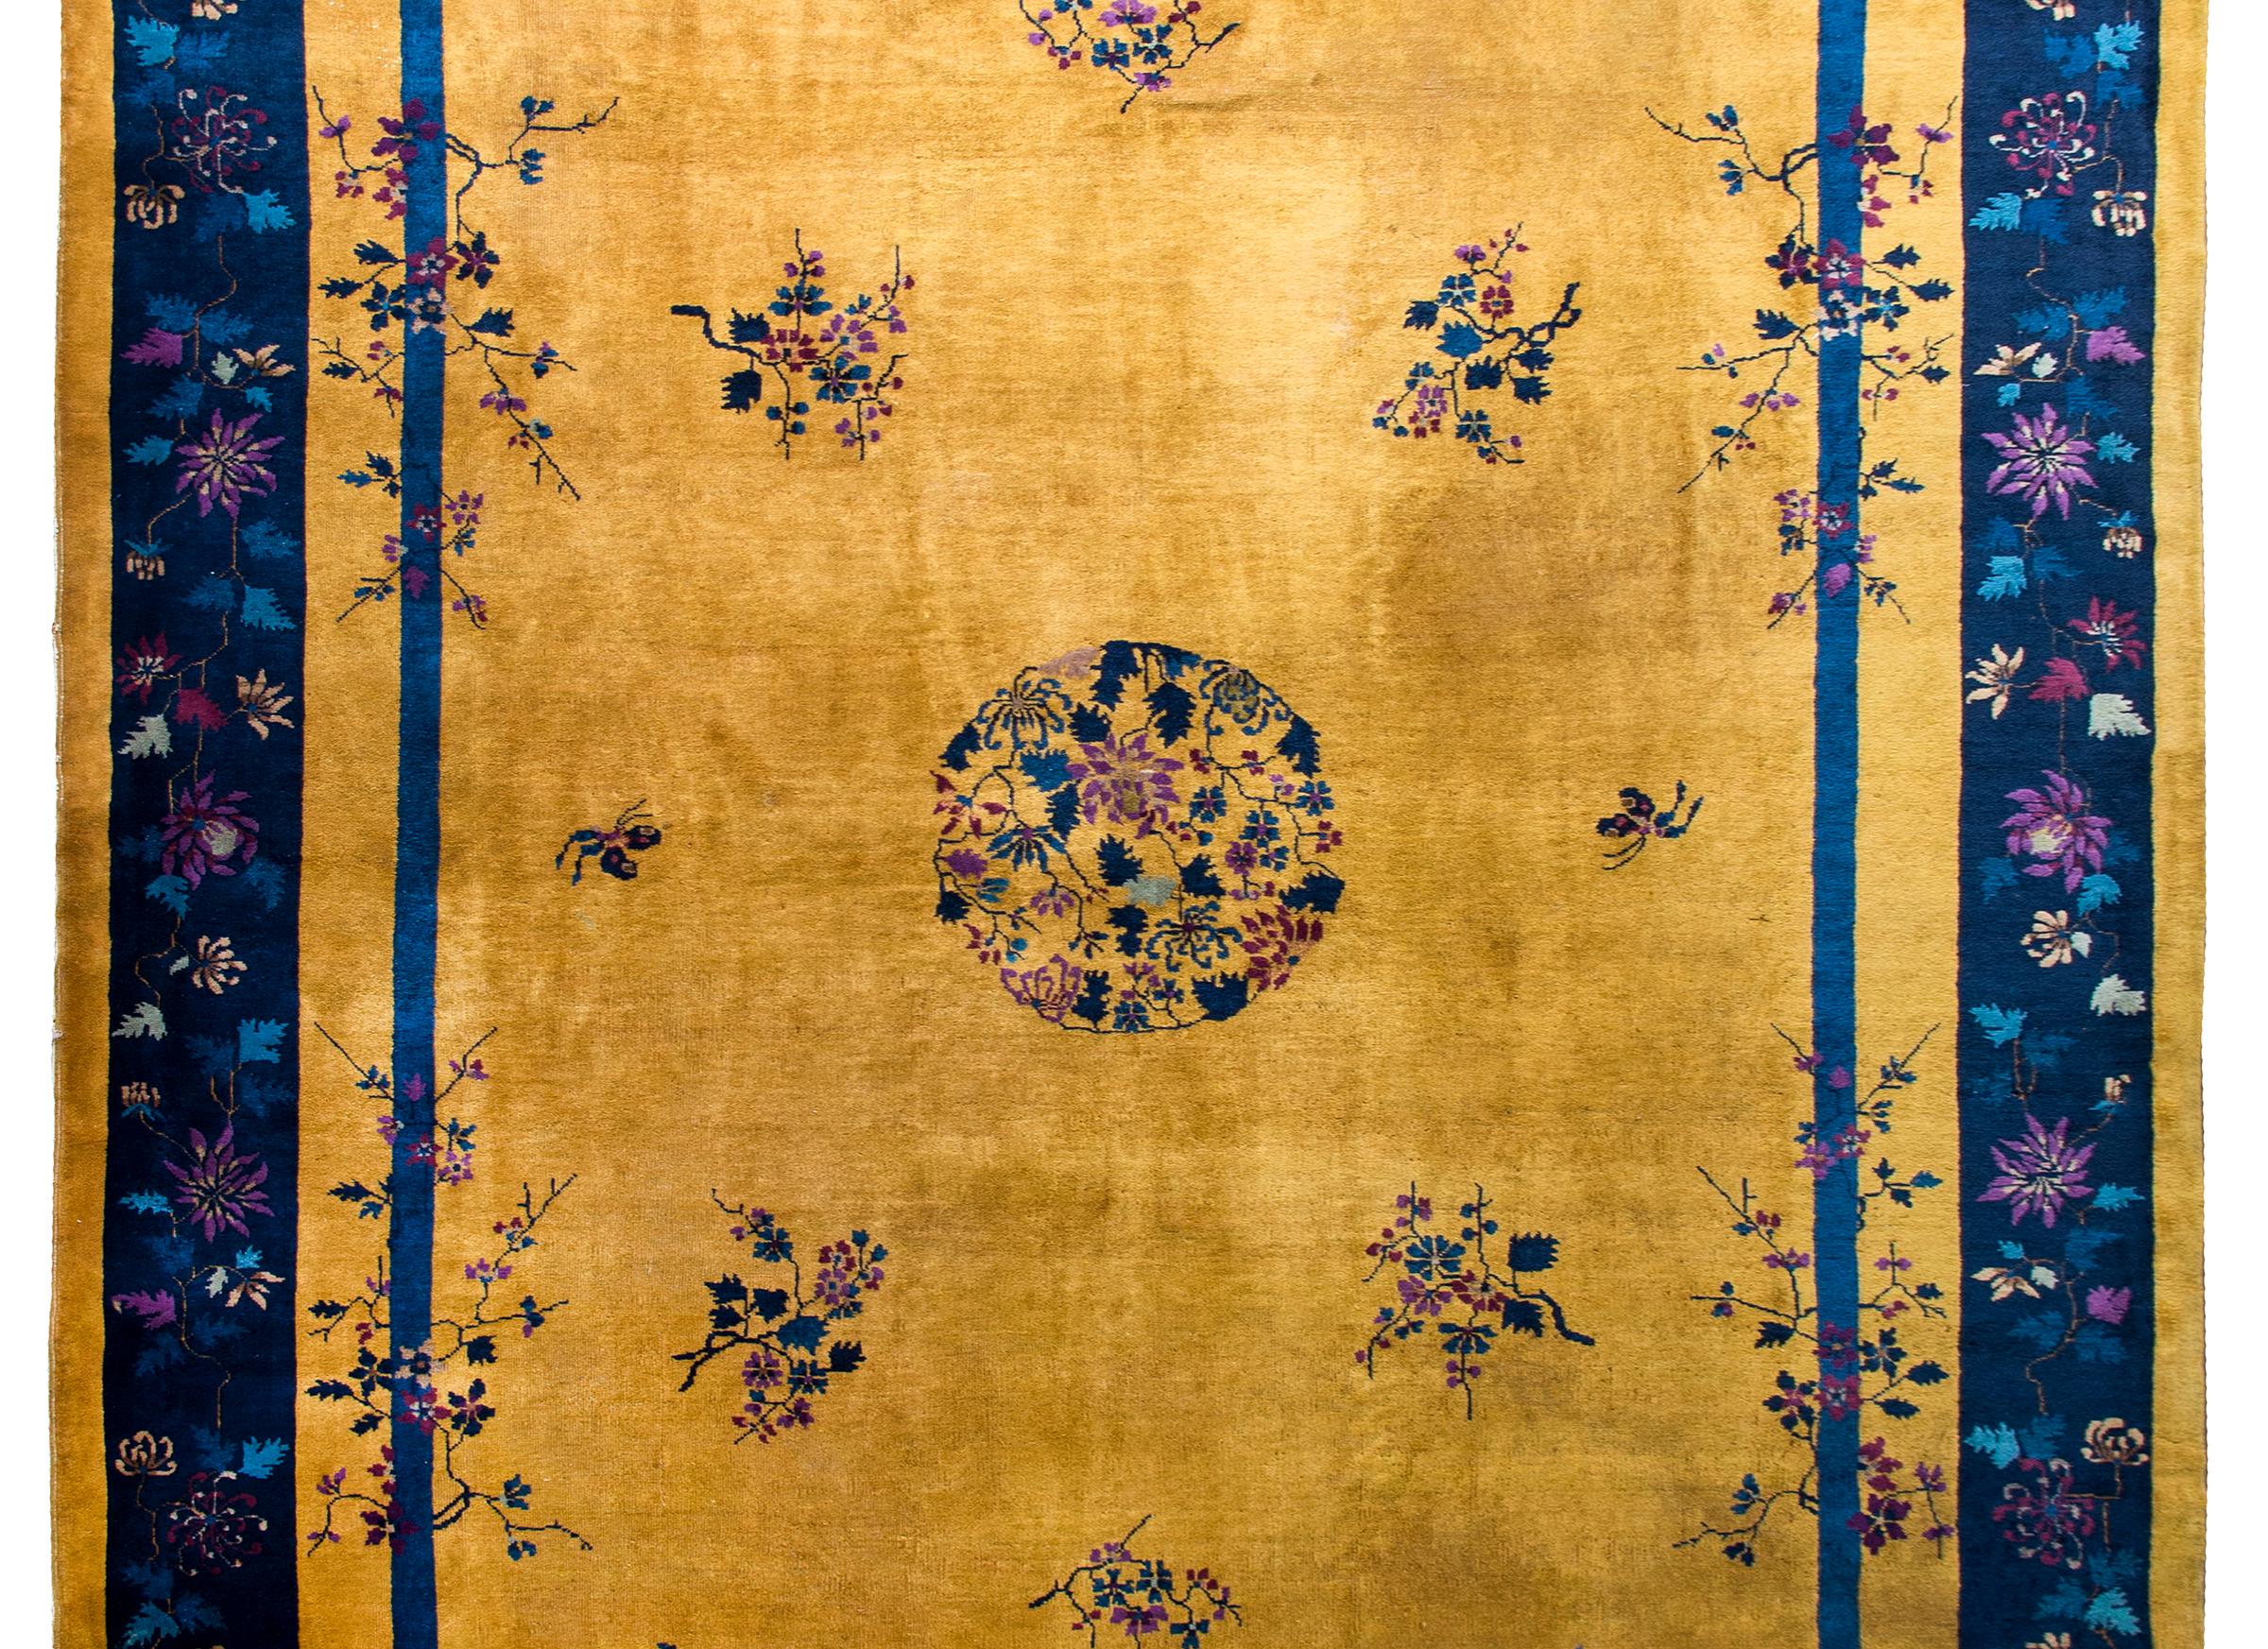 A stunning Chinese Art Deco rug with the most wonderful gold field covered in sprigs of prunus blossoms and a small central chrysanthemum medallion all woven in indigos, violets, and greens. The border is wonderful with a wide indigo striped with a